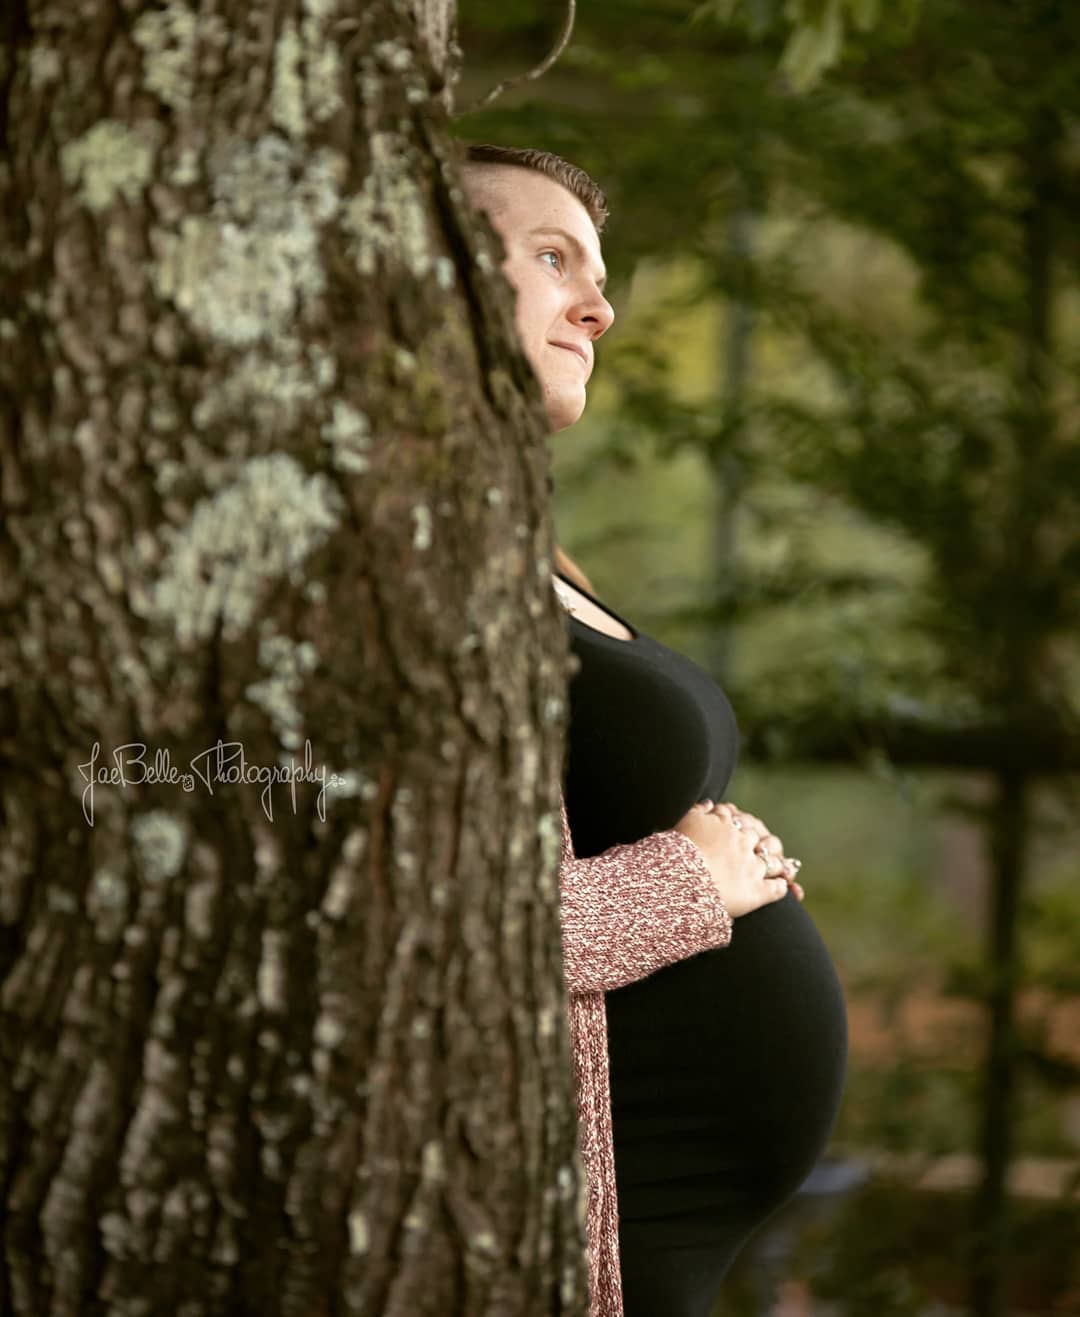 maternityy picture ideas BpVi8eHFESk